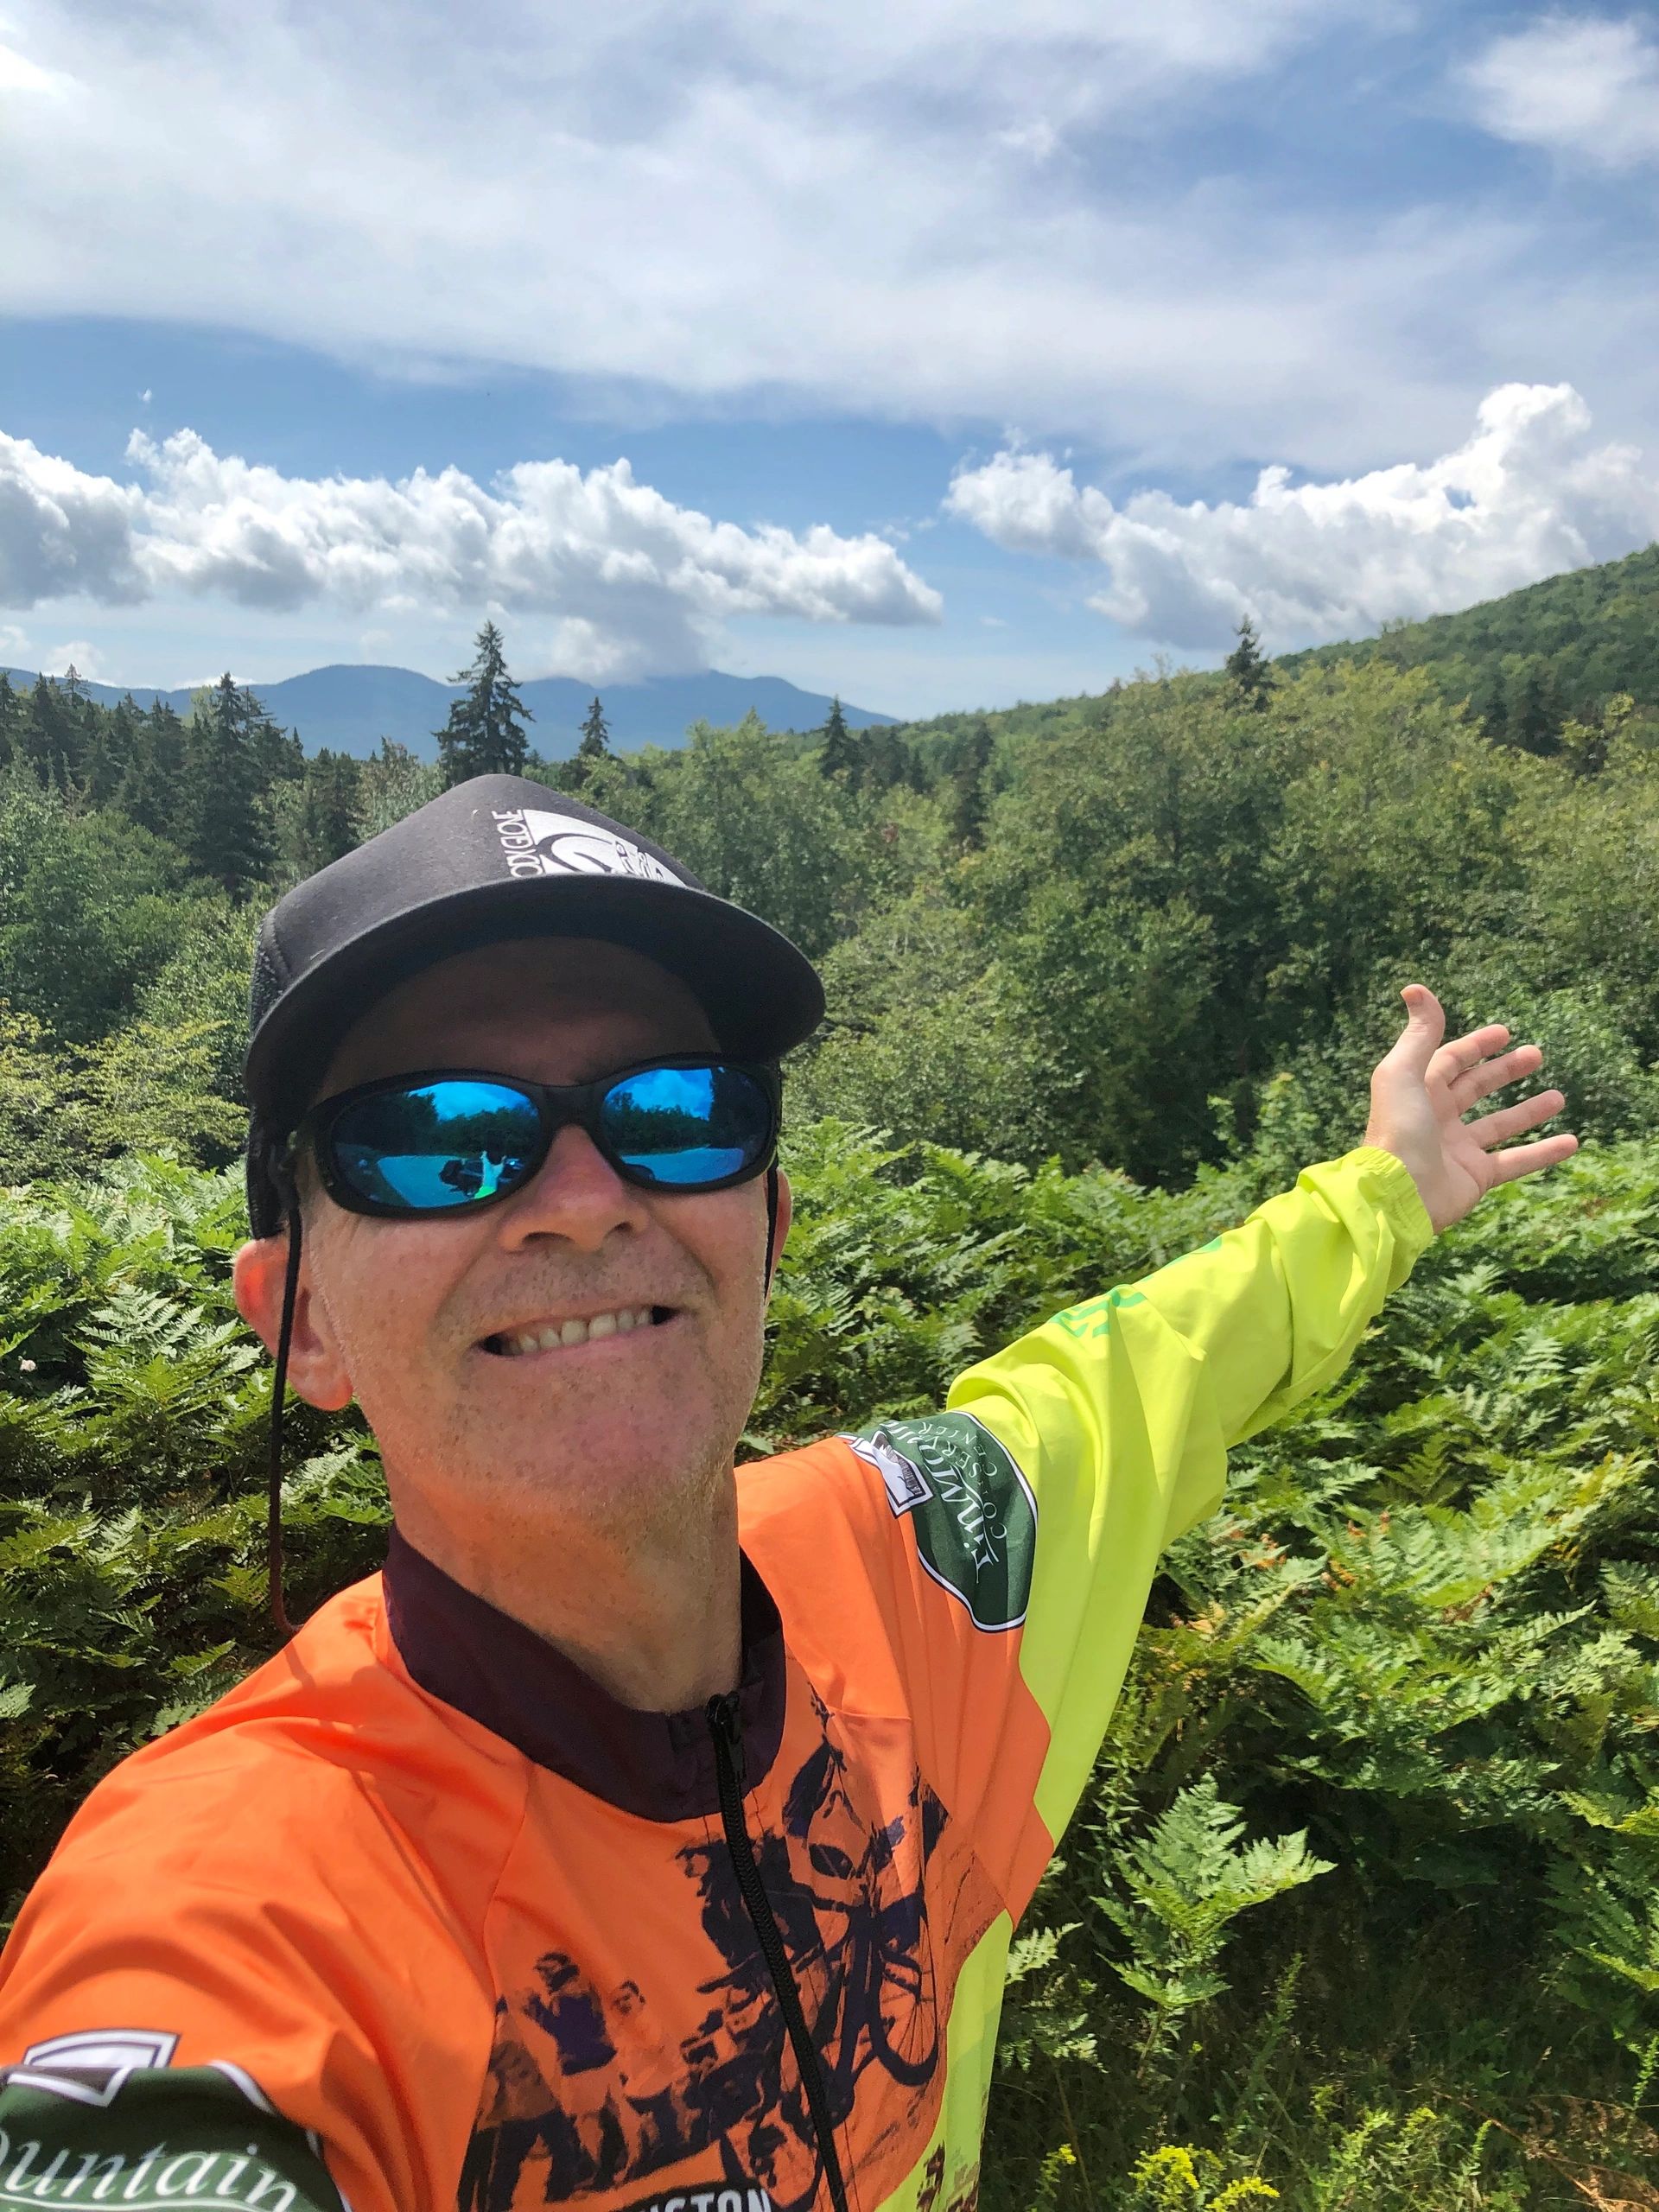 Brian Hall the day after the 2019 MWARBH Race driving home on Bear Notch Road, Bartlett, NH.